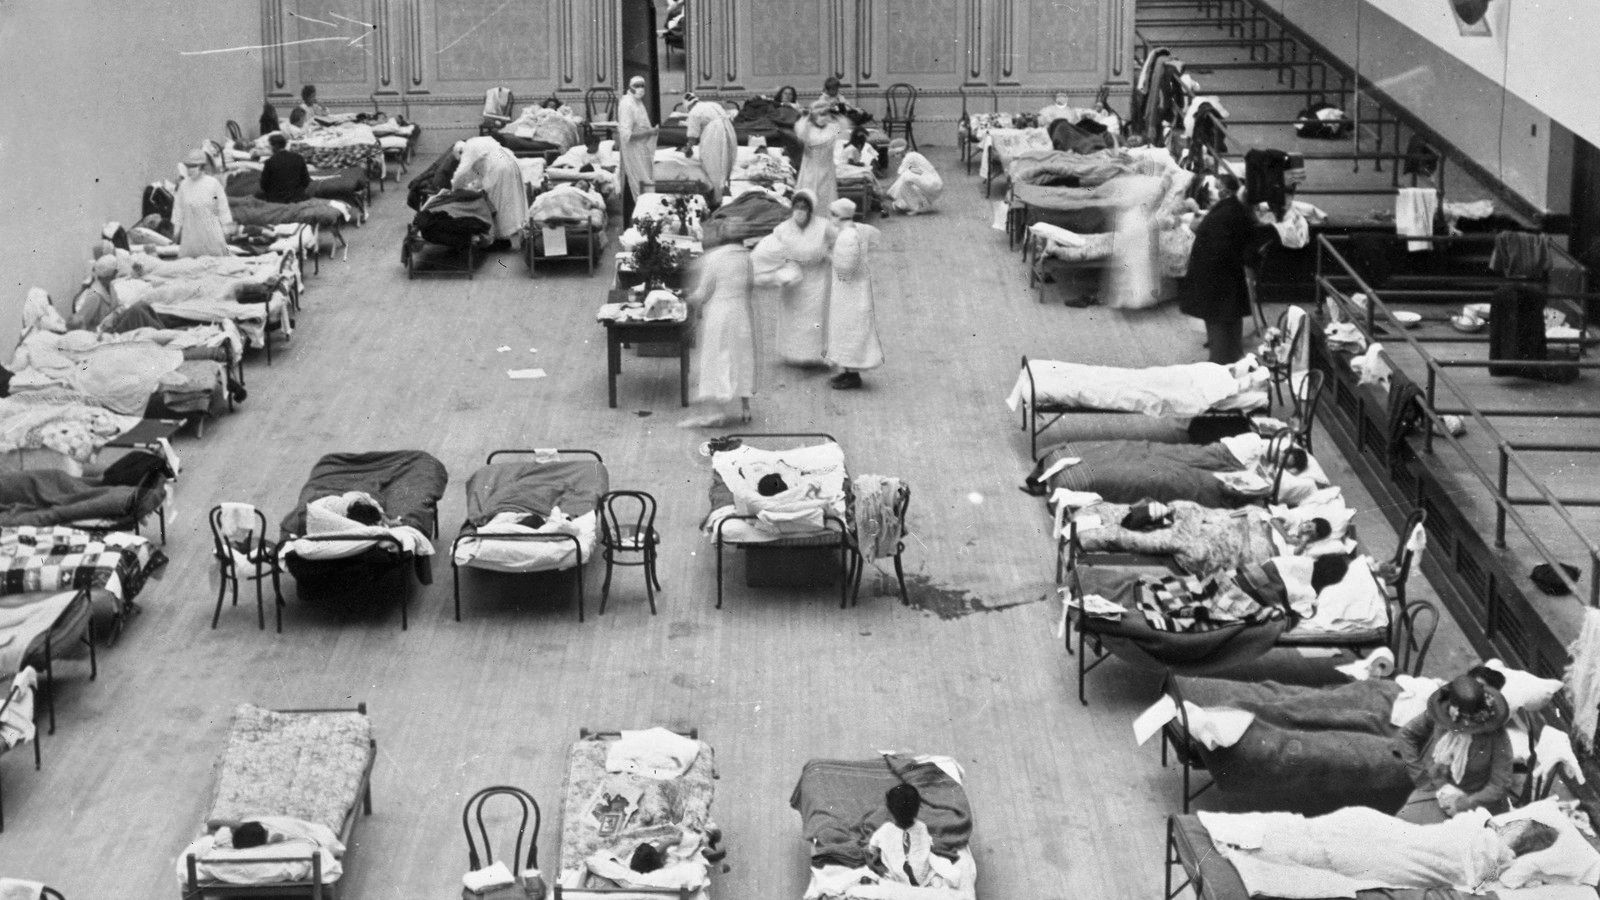 during the 1916 Flu